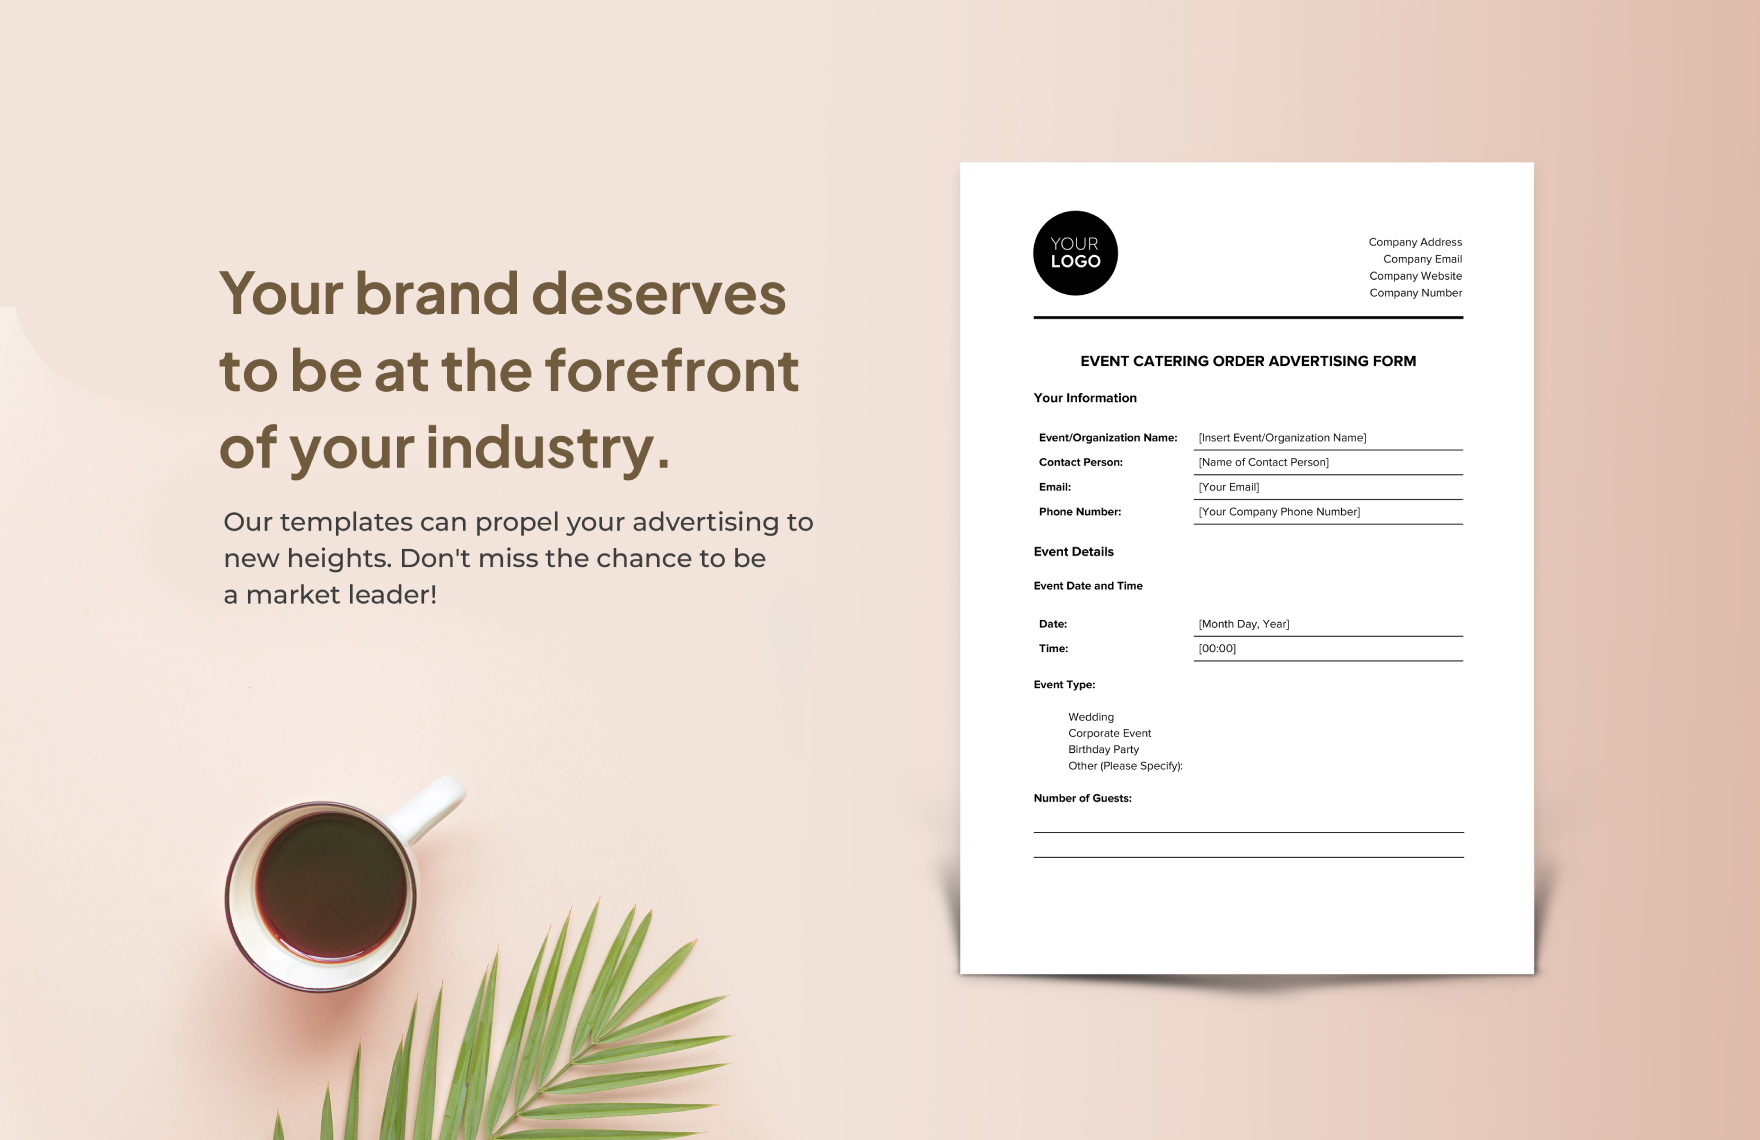 Event Catering Order Advertising Form Template